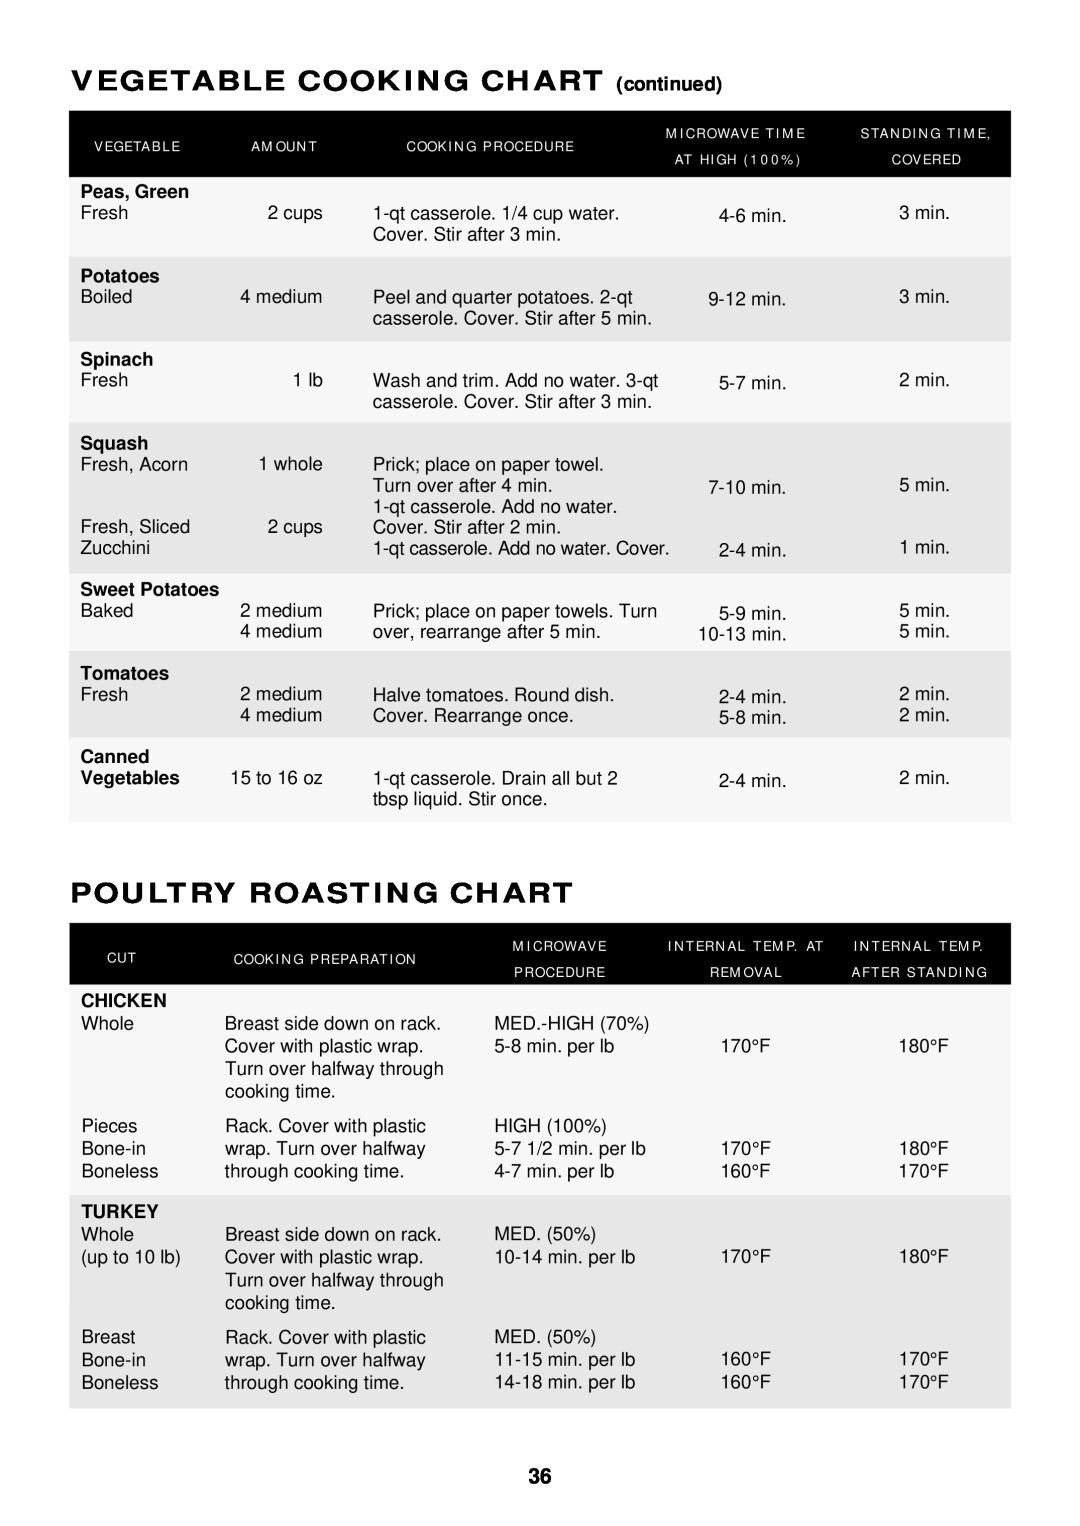 Sharp R-1505 VEGETABLE COOKING CHART continued, Poultry Roasting Chart, C U T, A M O U N T, V E G E Ta B L E, Peas, Green 